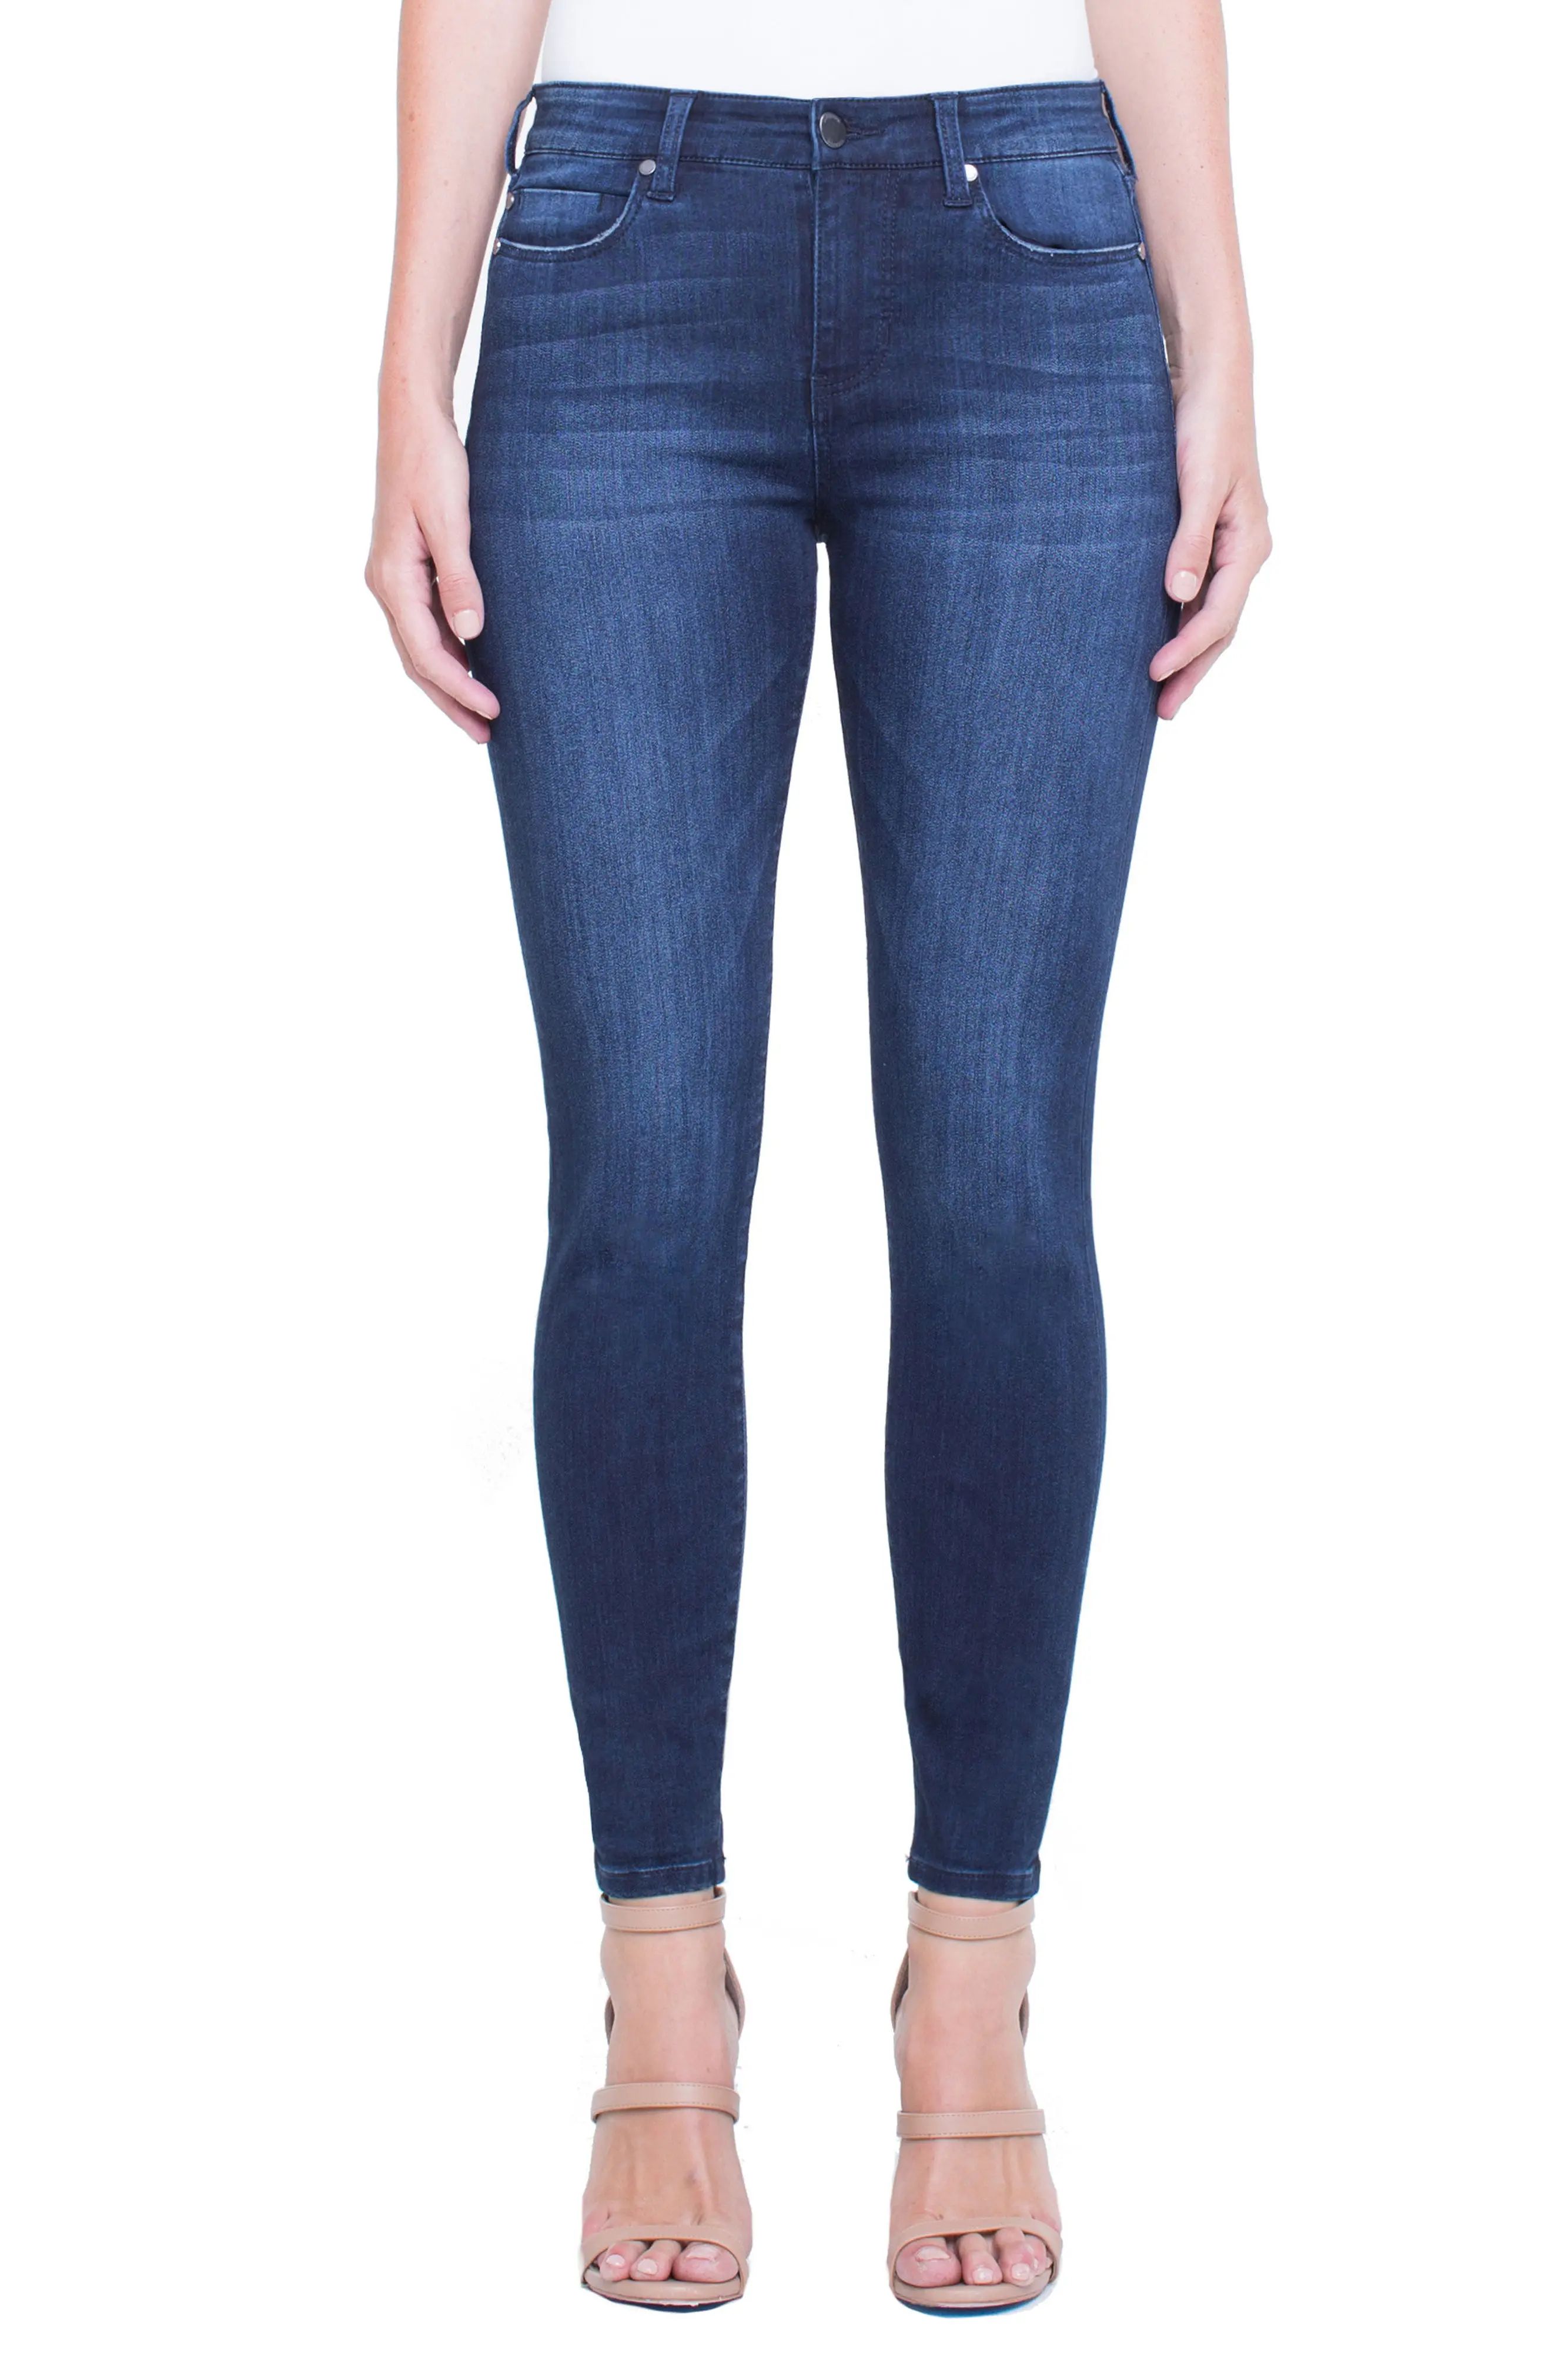 Liverpool Jeans Company Penny Ankle Skinny Jeans, Size 4P in Westport Wash at Nordstrom | Nordstrom